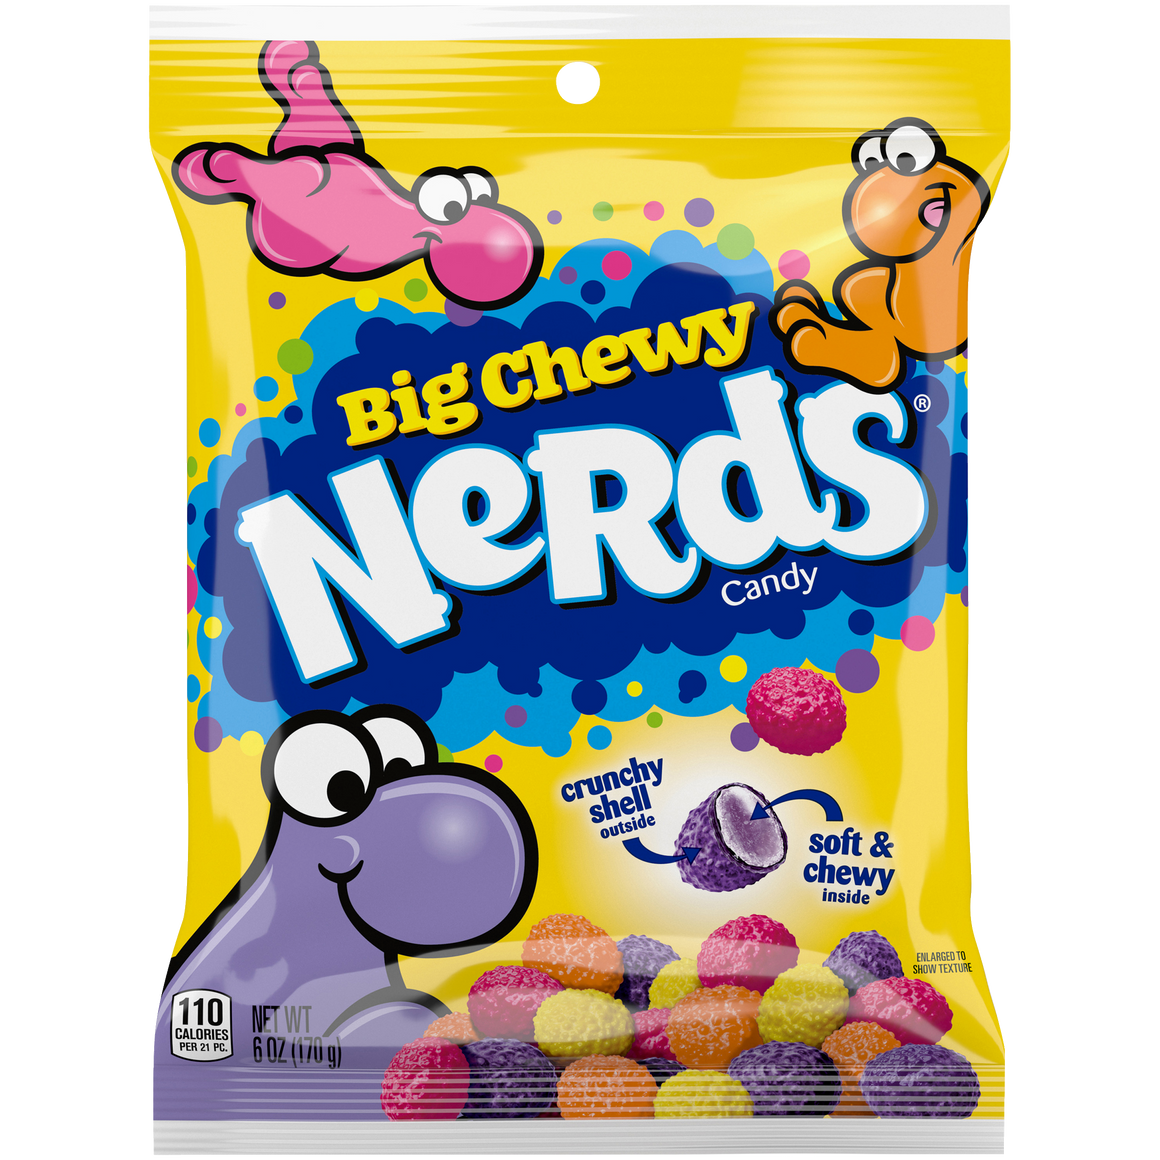 All City Candy Big Chewy Nerds Candy - 6-oz. Bag Chewy Ferrara Candy Company For fresh candy and great service, visit www.allcitycandy.com